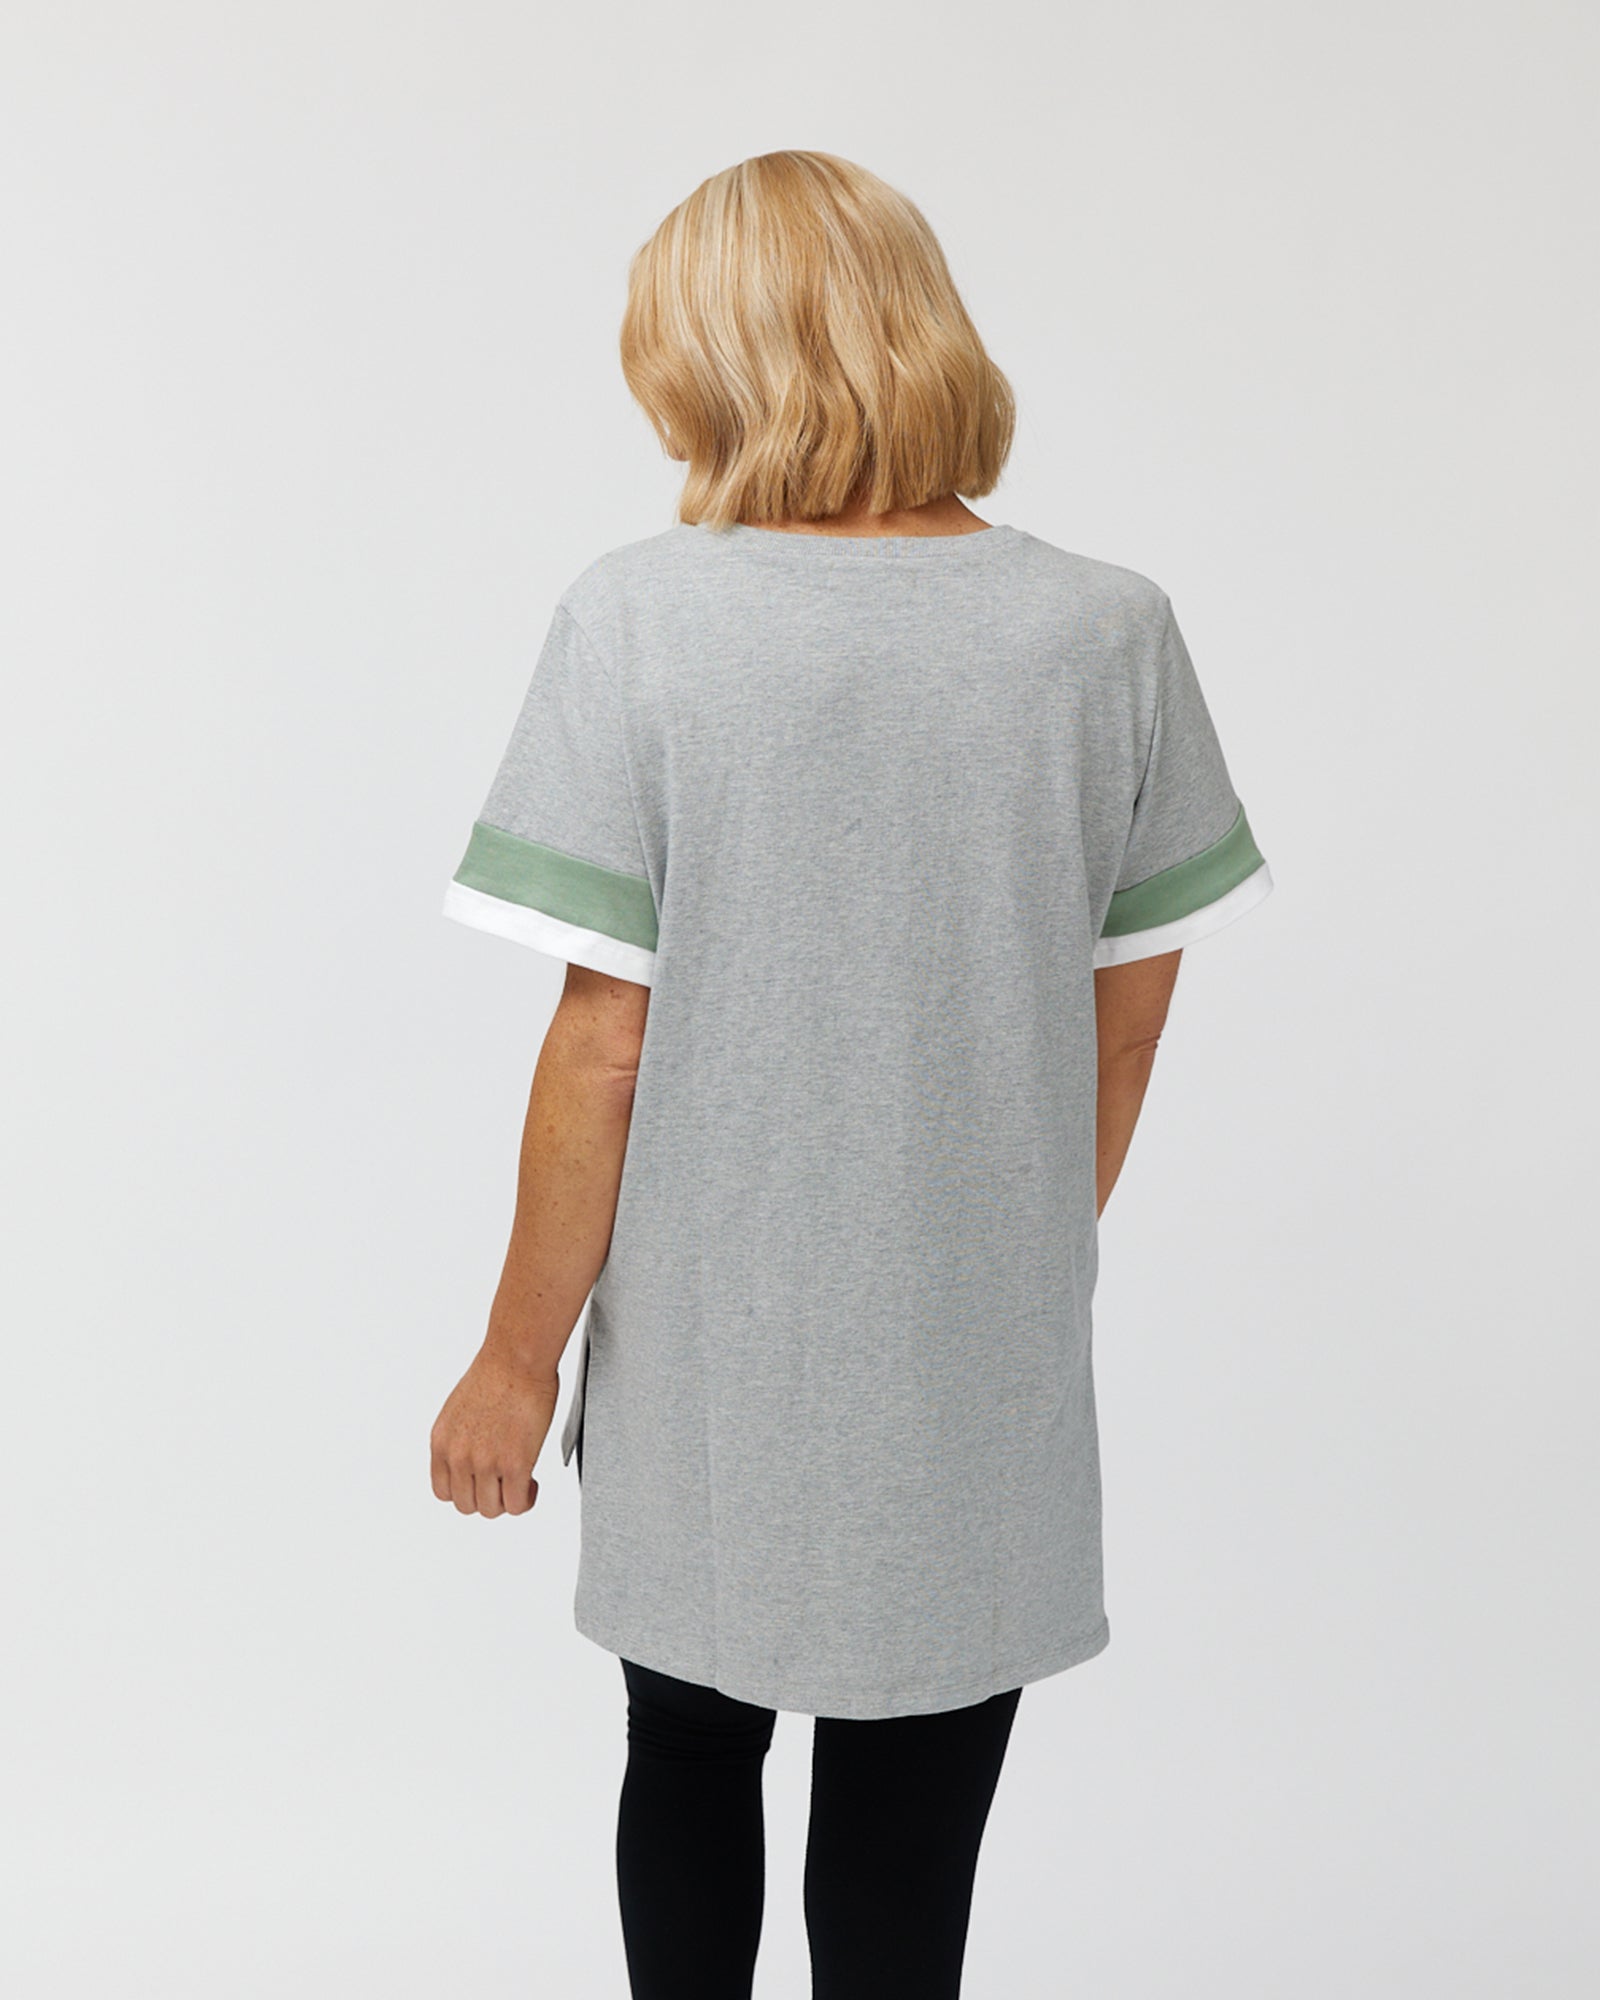 Sports Luxe Tee - Grey Marle T-shirt Avila the label 